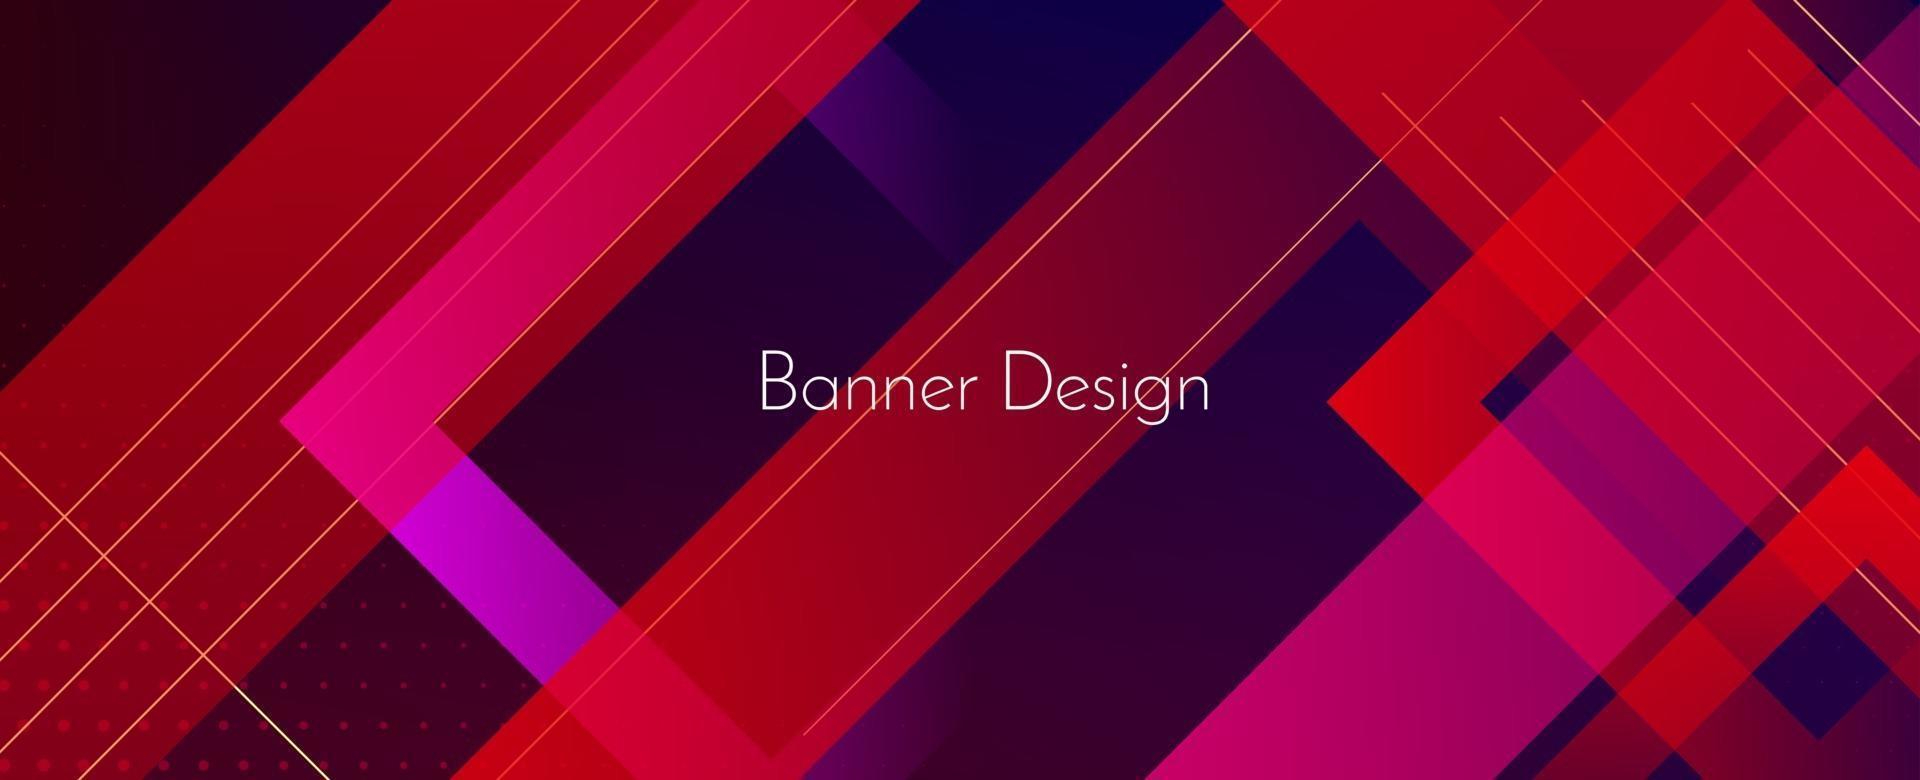 Abstract dark geometric colorful modern decorative banner design background vector